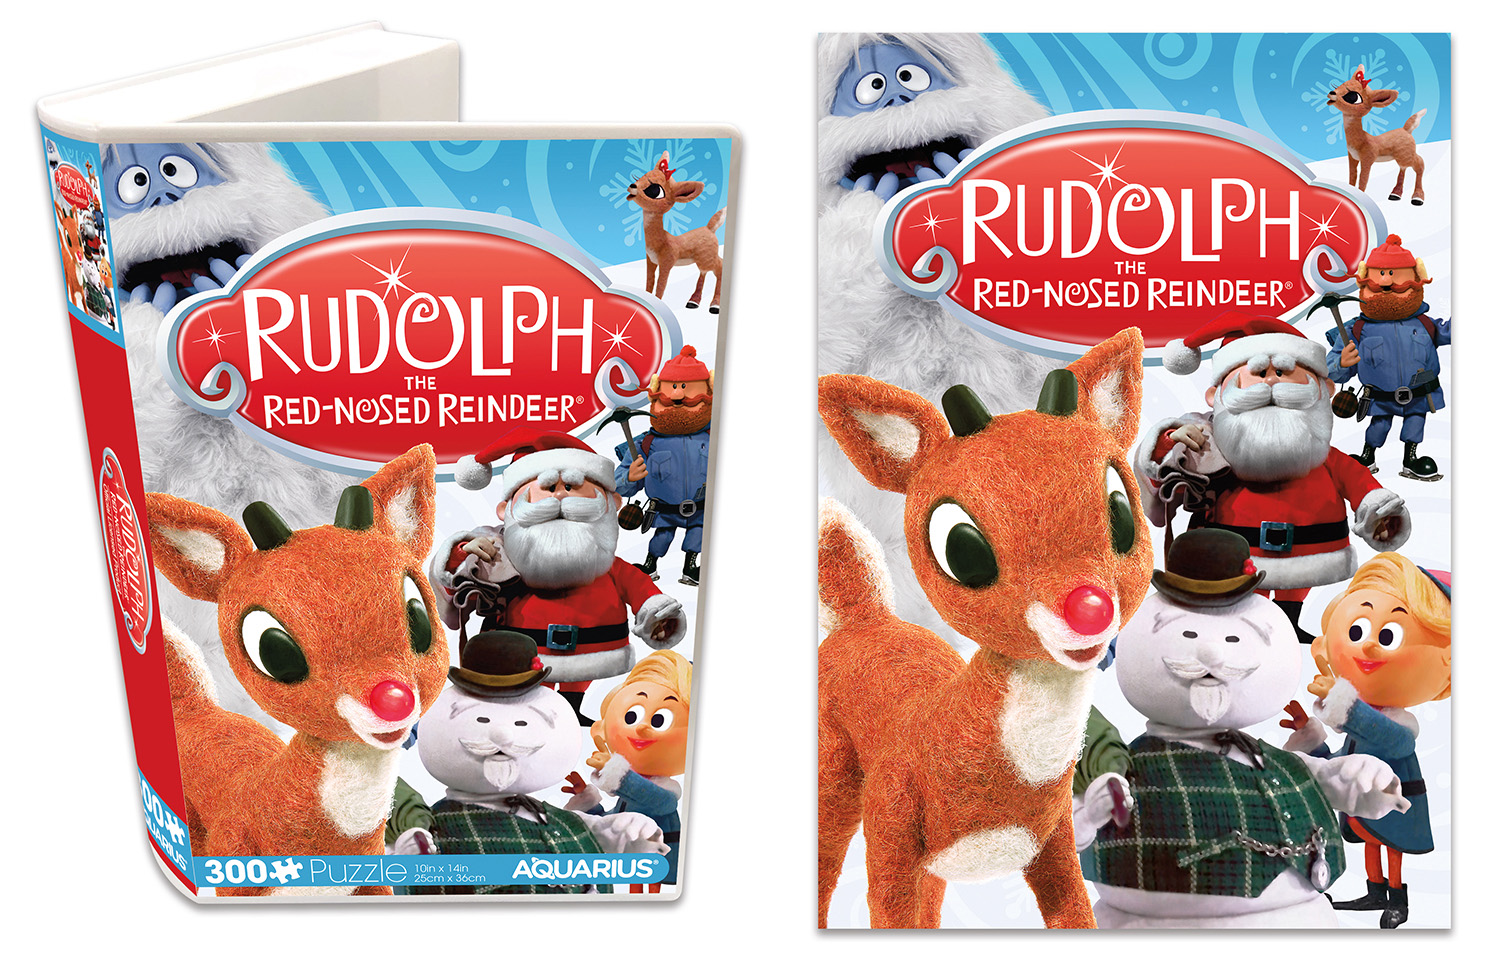 Rudolph the Red-Nosed Reindeer Vuzzle